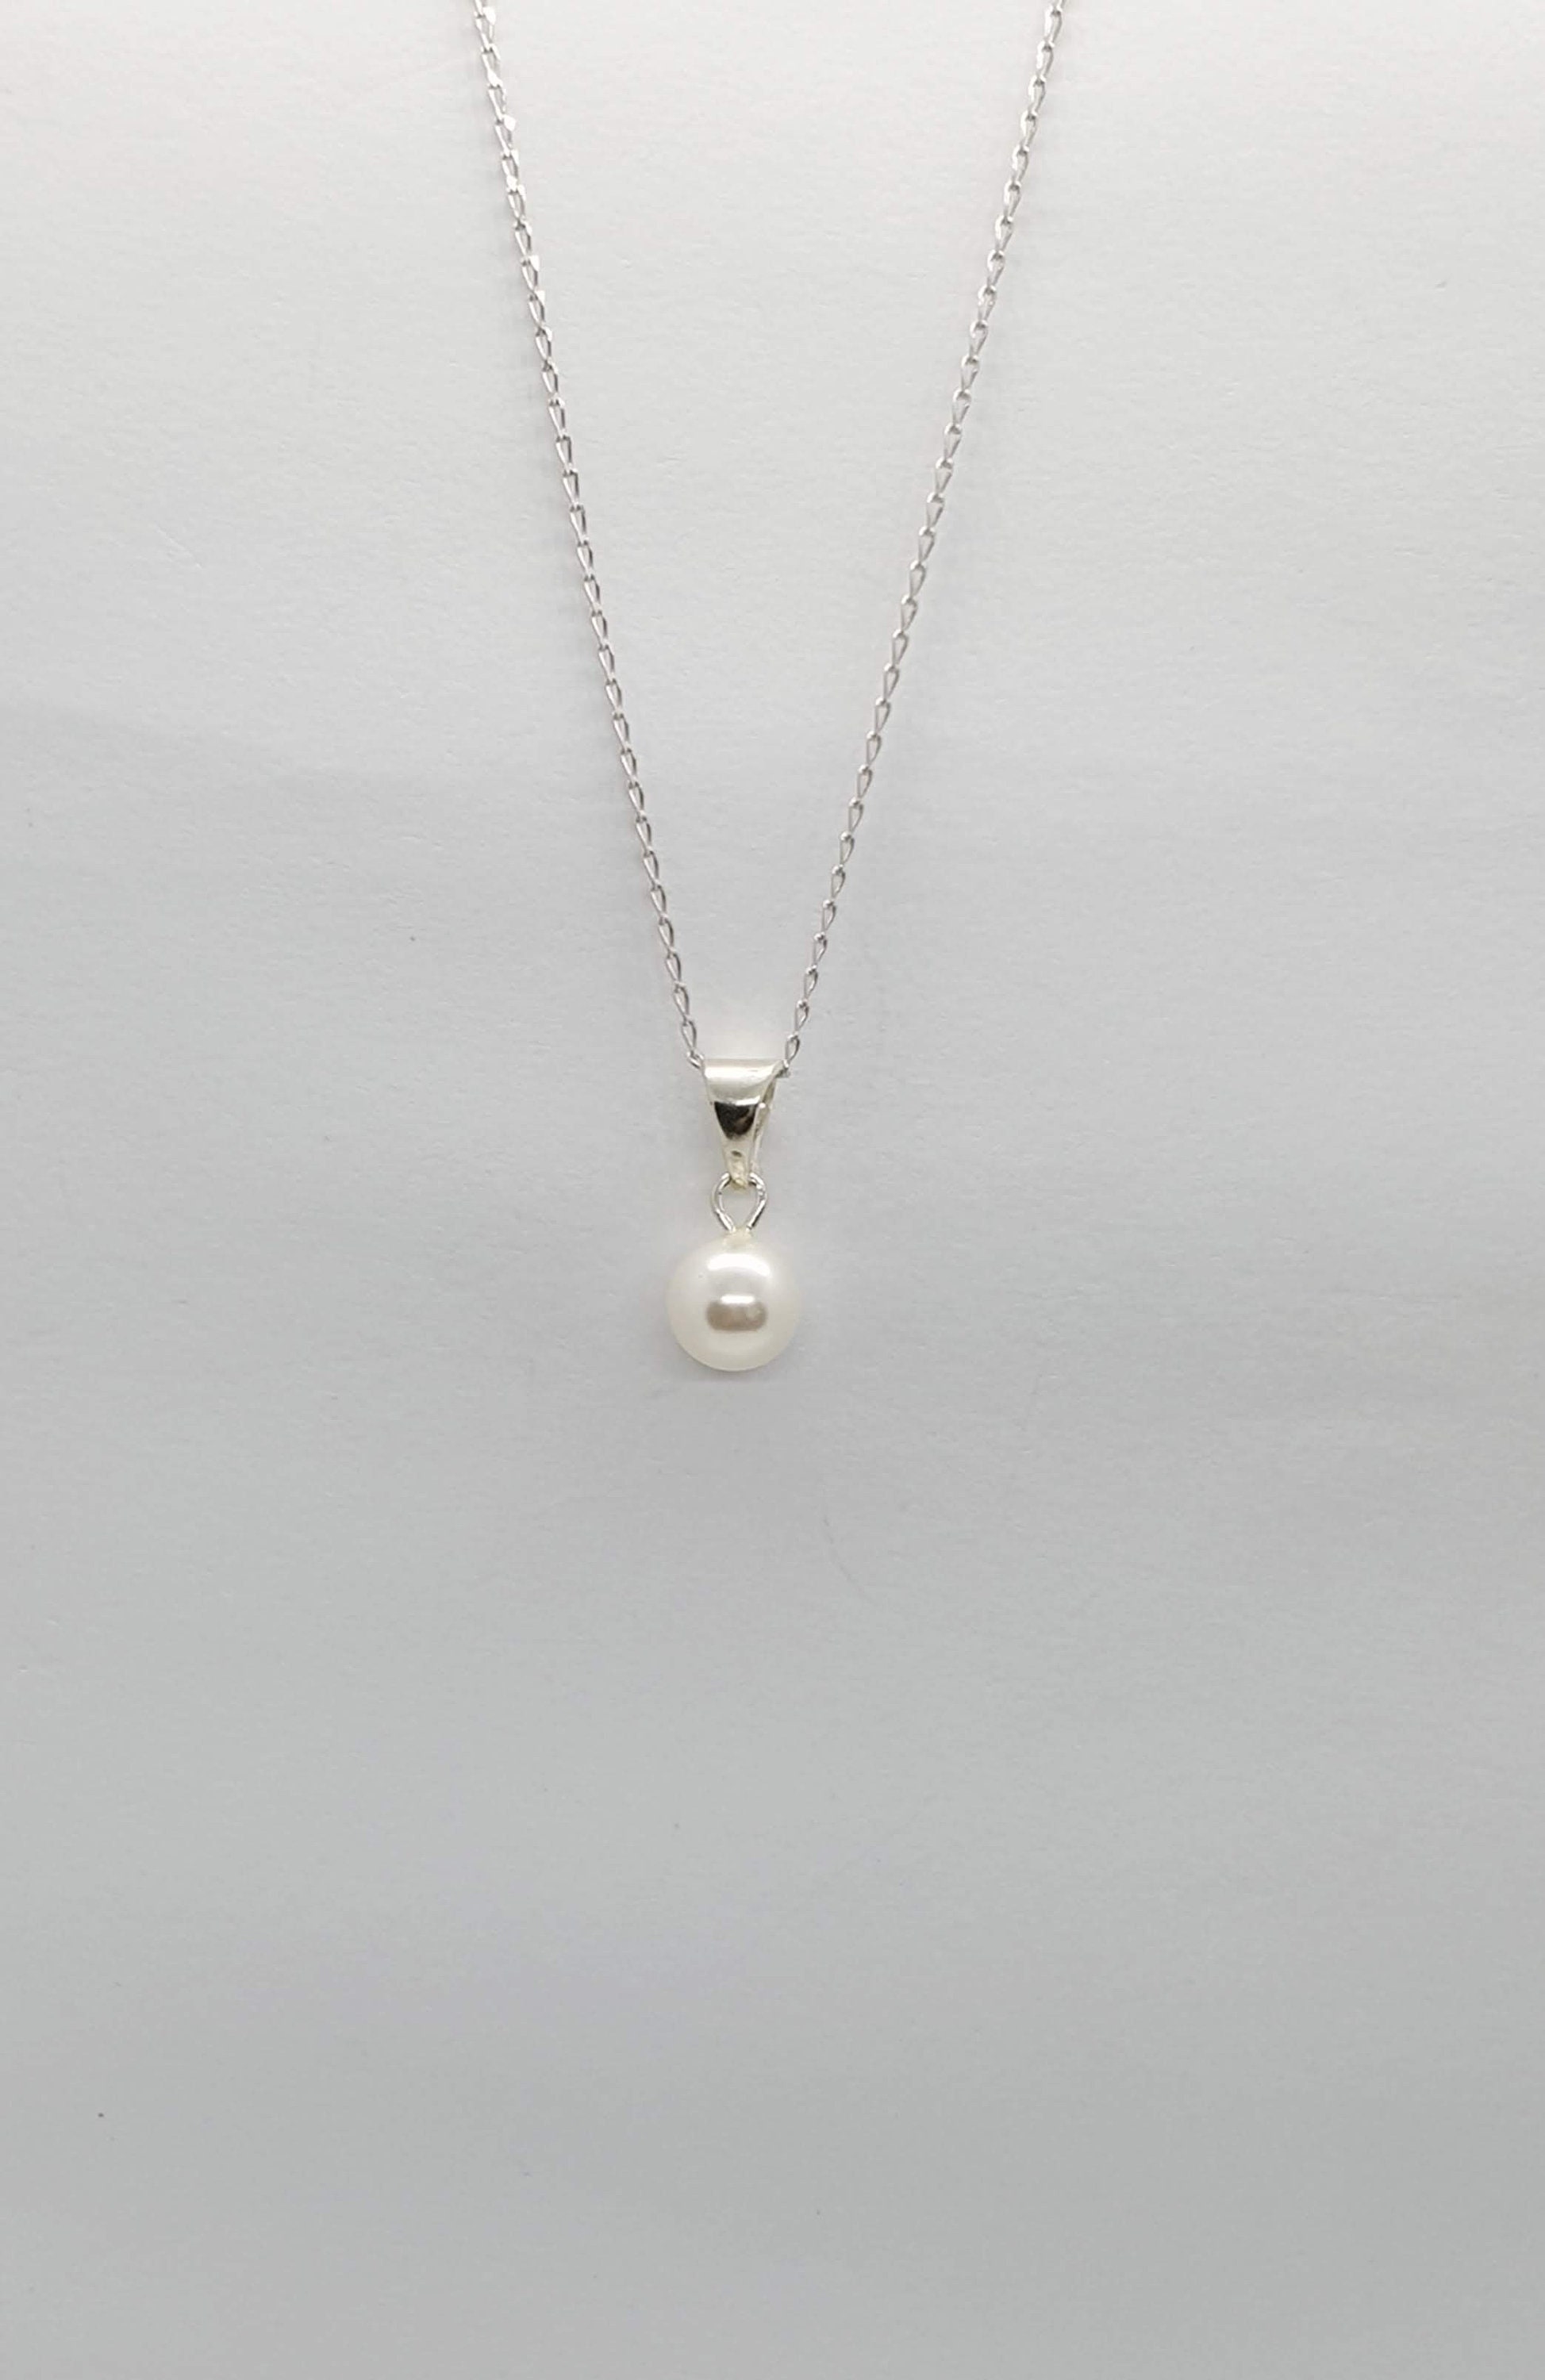 Pearl Necklace, Single Pearl Necklace, Swarovski Necklace, Jewelry Gift ...